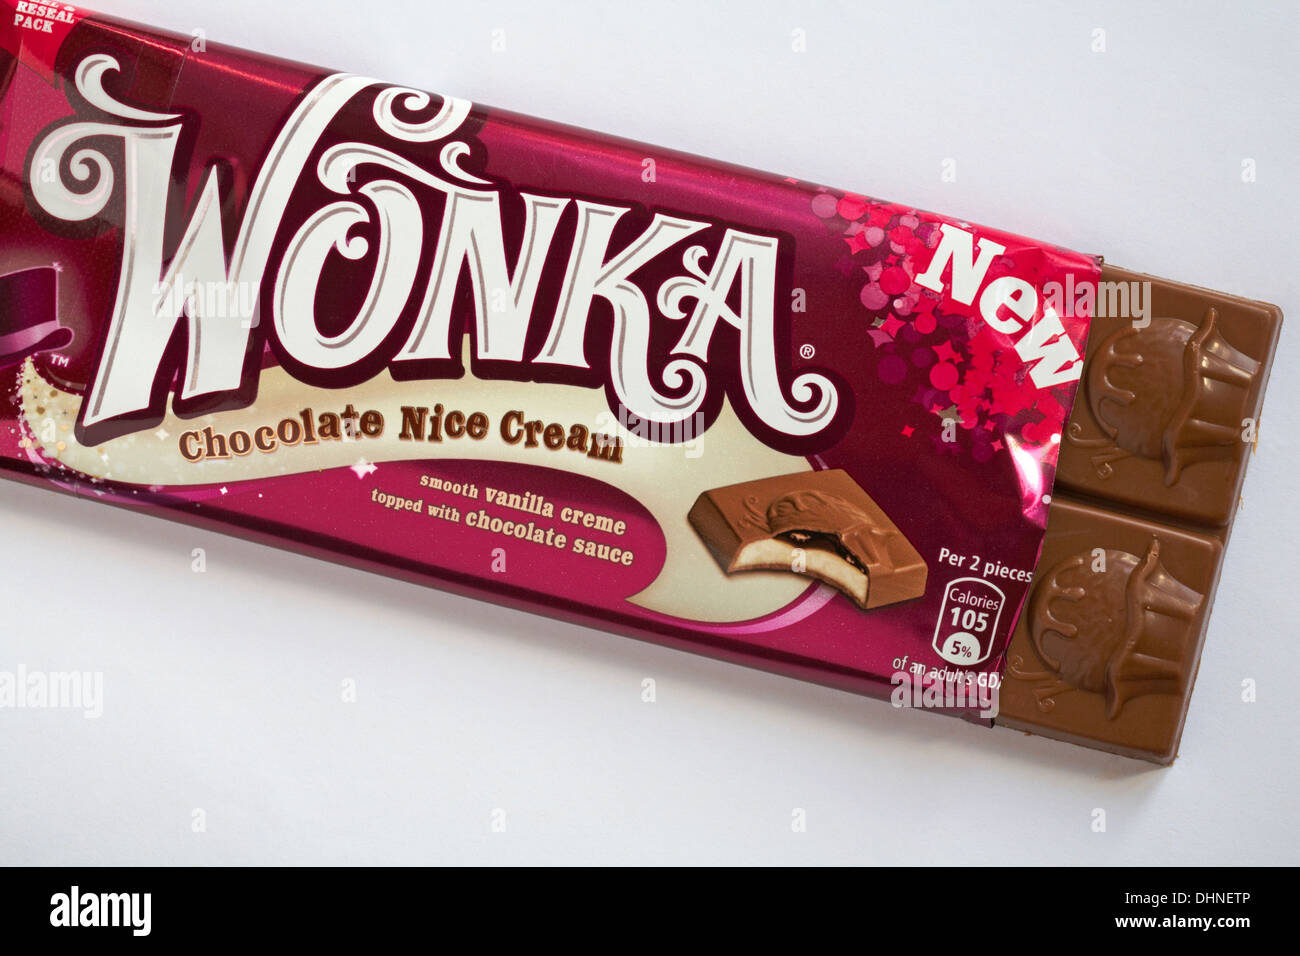 New Wonka Chocolate Nice Cream flavoured chocolate bar opened to show contents set on white background Stock Photo